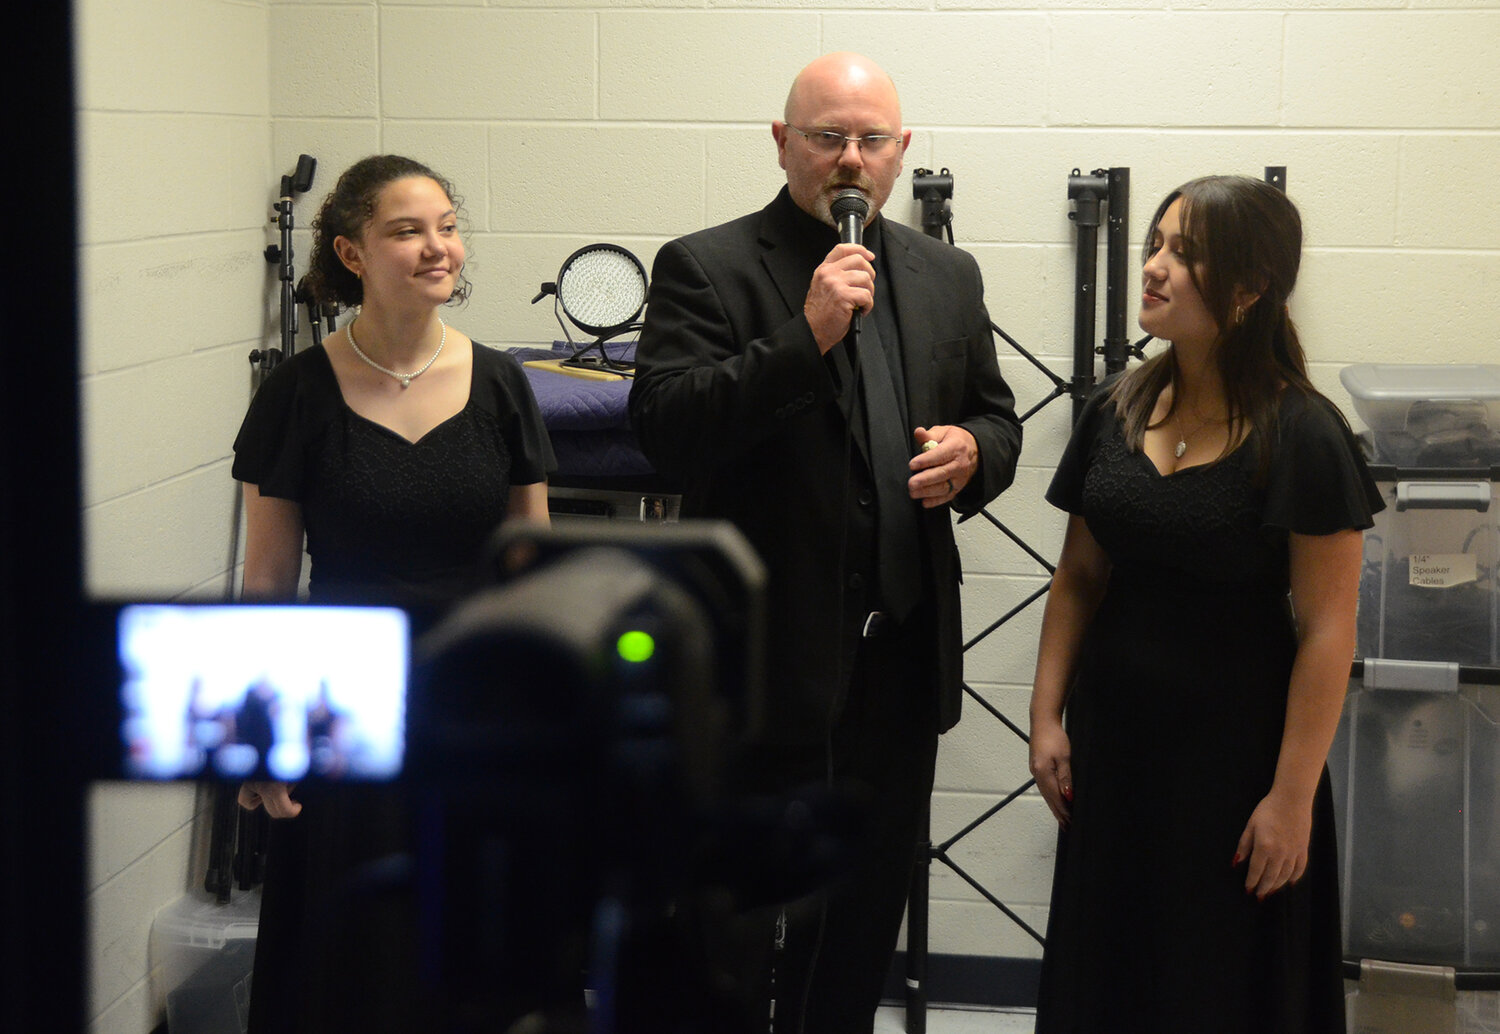 Aledo Band Director Jacob Albin speaks with choir members Victoria Duffey and Katie Curran backstage as the interview appears on stage for the pre-event audience to enjoy.